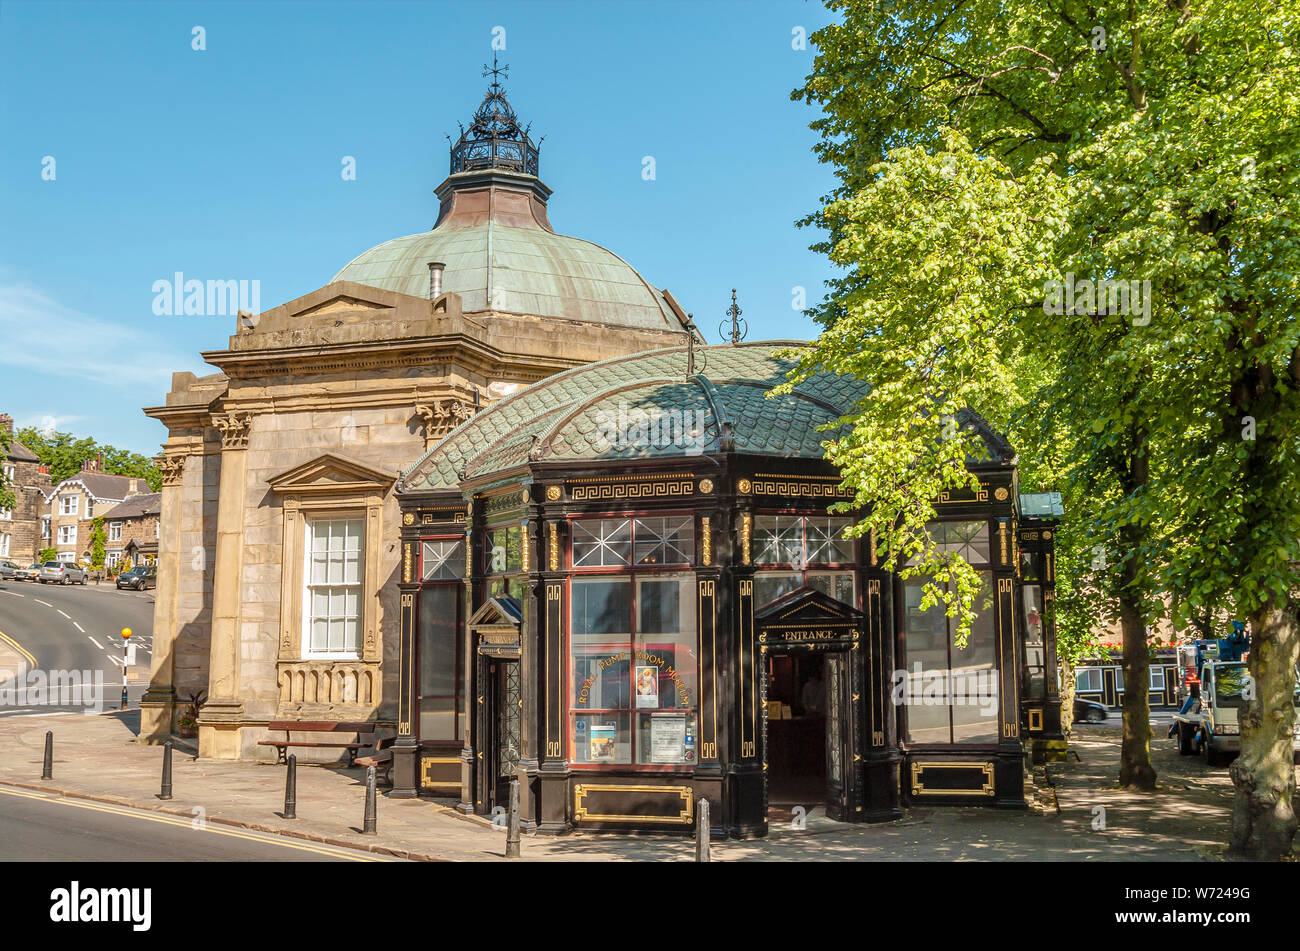 Royal Pump Room in Harrogate a spa town in North Yorkshire, England Stock Photo